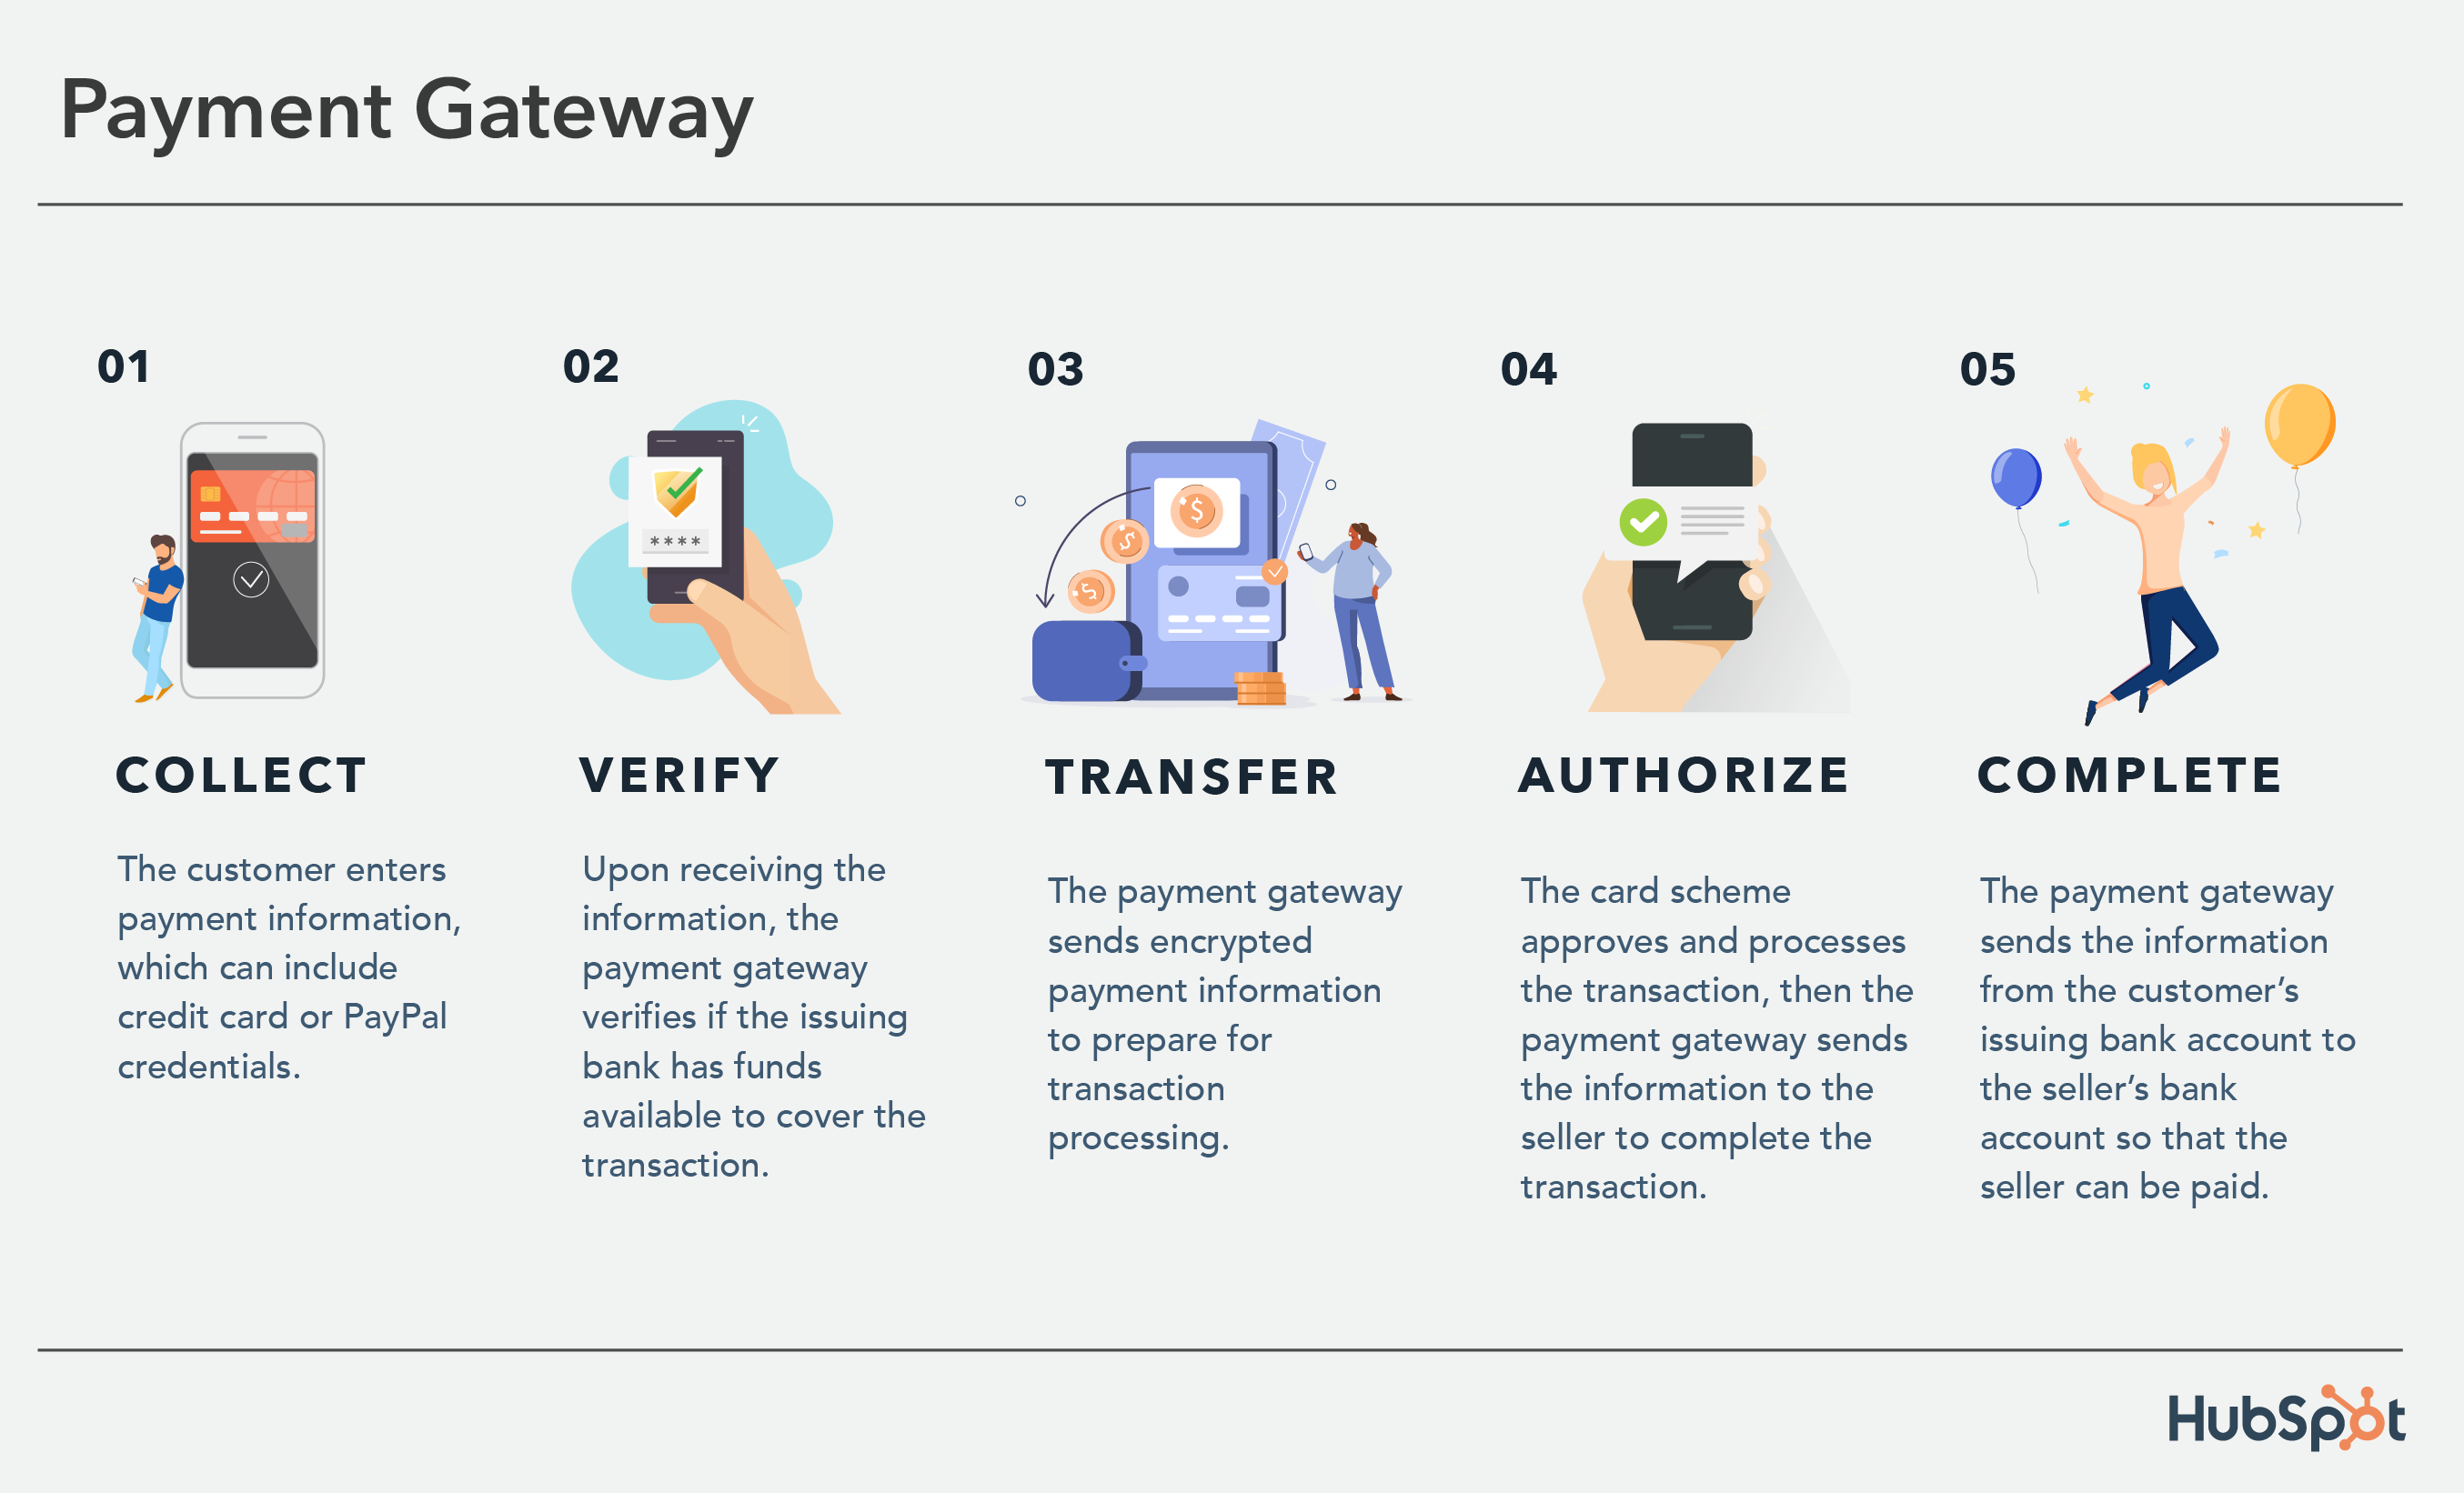 Everything You Need to Know About Payment Gateways